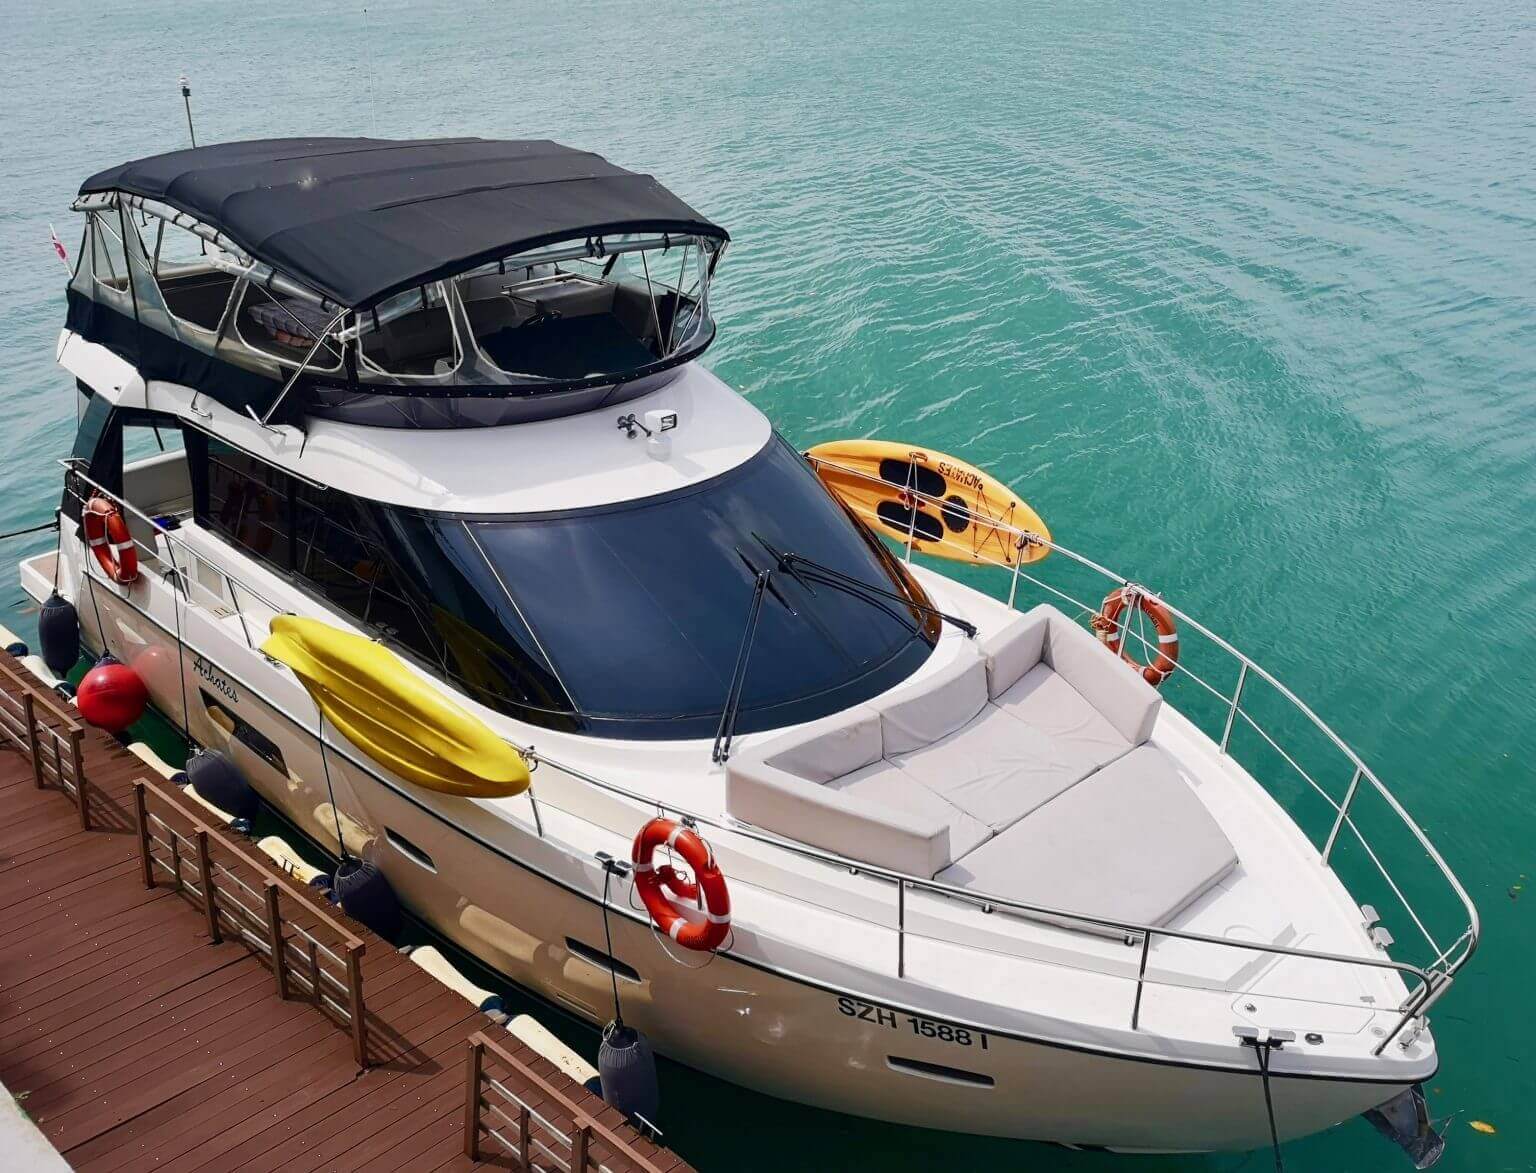 Luxury yacht rentals in Singapore for sailing around Singapore's Southern Islands